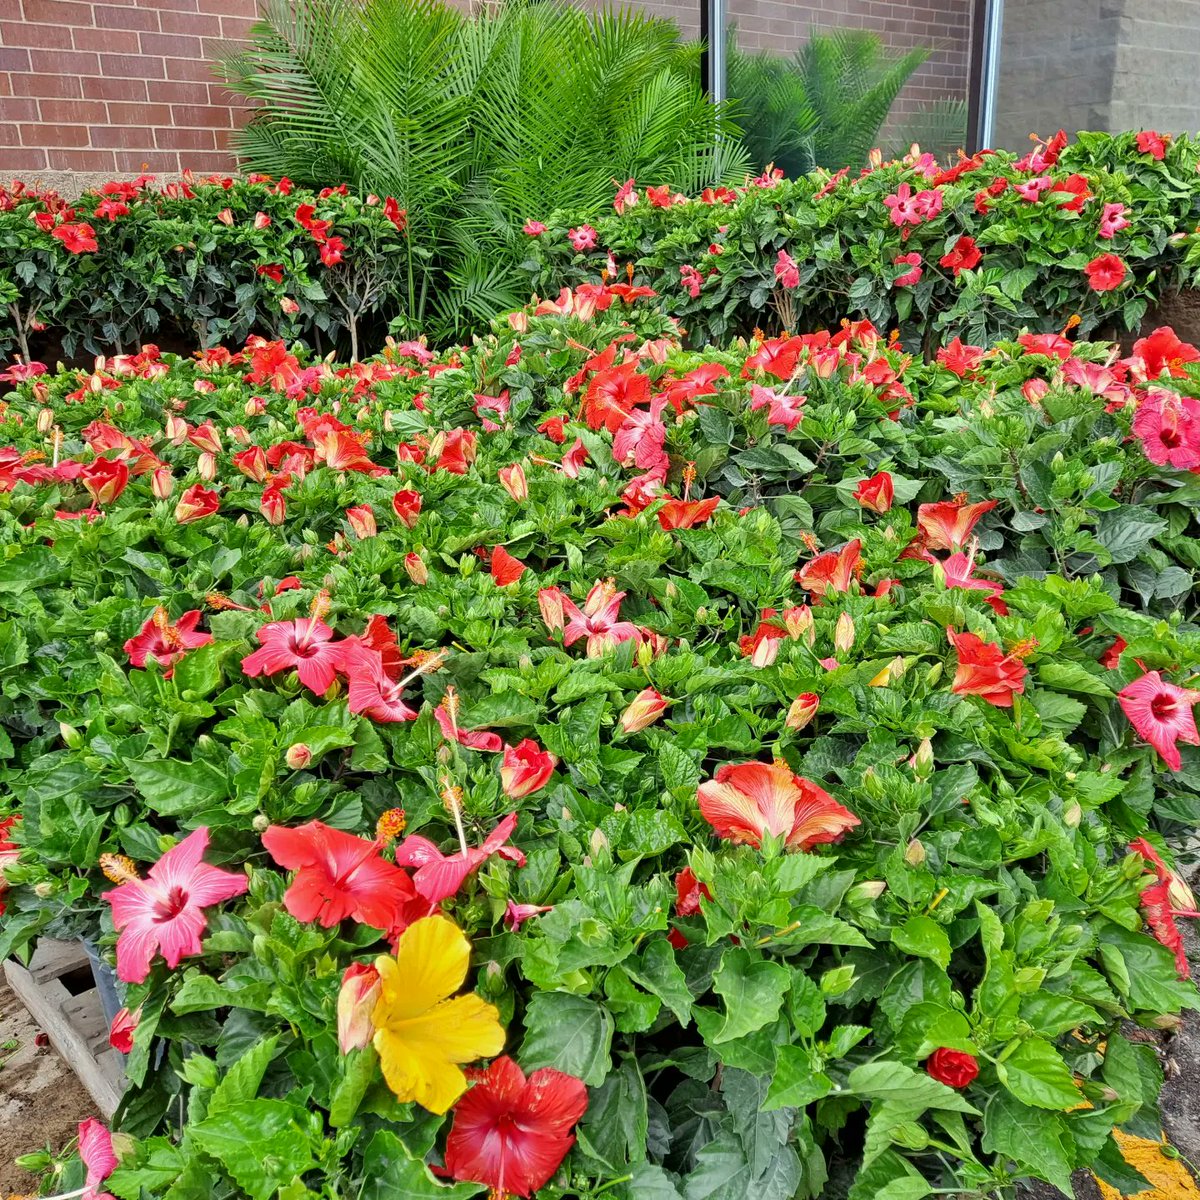 Spring has sprung in the @HomeDepot St Louis Park Garden center, part 2...
For the 🌺hibiscus🌺 groupies out there, we got a truckload today, many varieties...
Hurry hurry, they sell very quickly! 🙂🌺🌺🌺